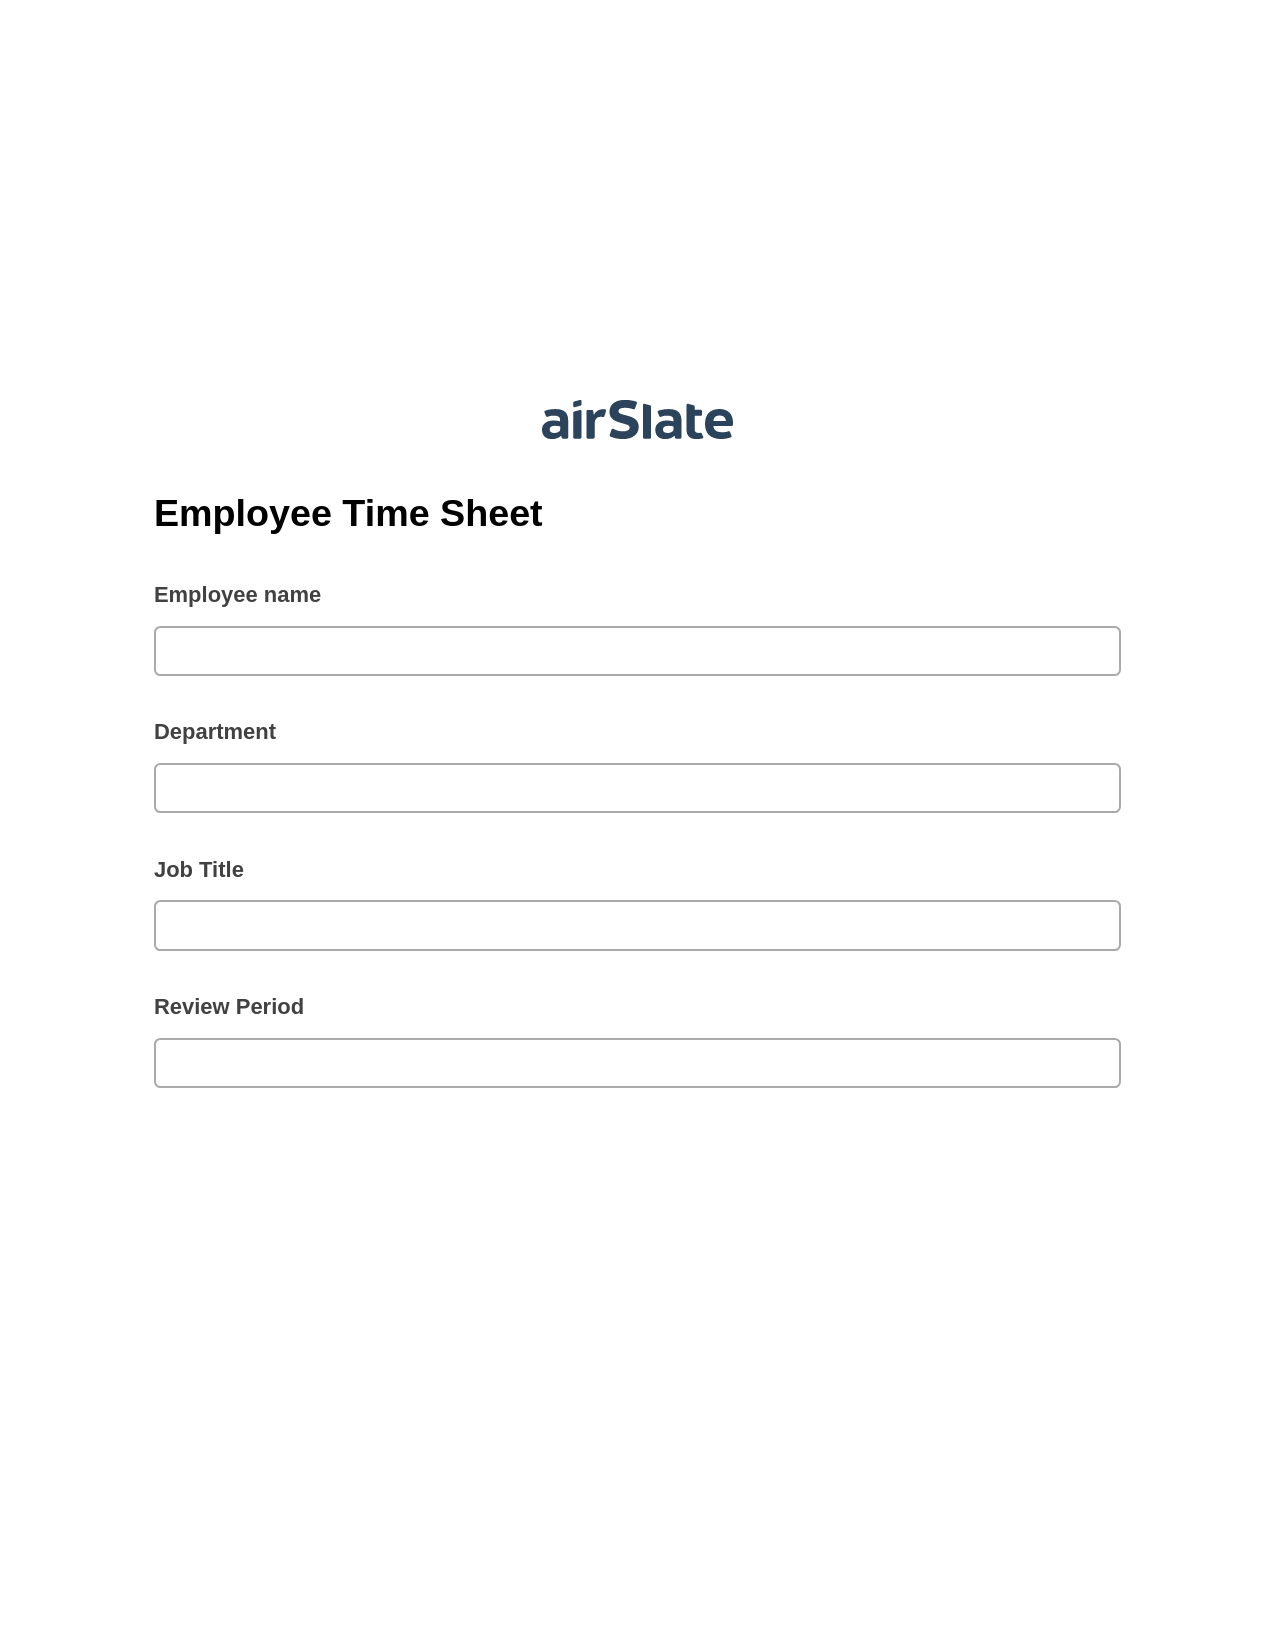 Employee Time Sheet Pre-fill Dropdowns from Airtable, Create Salesforce Records Bot, Archive to Google Drive Bot